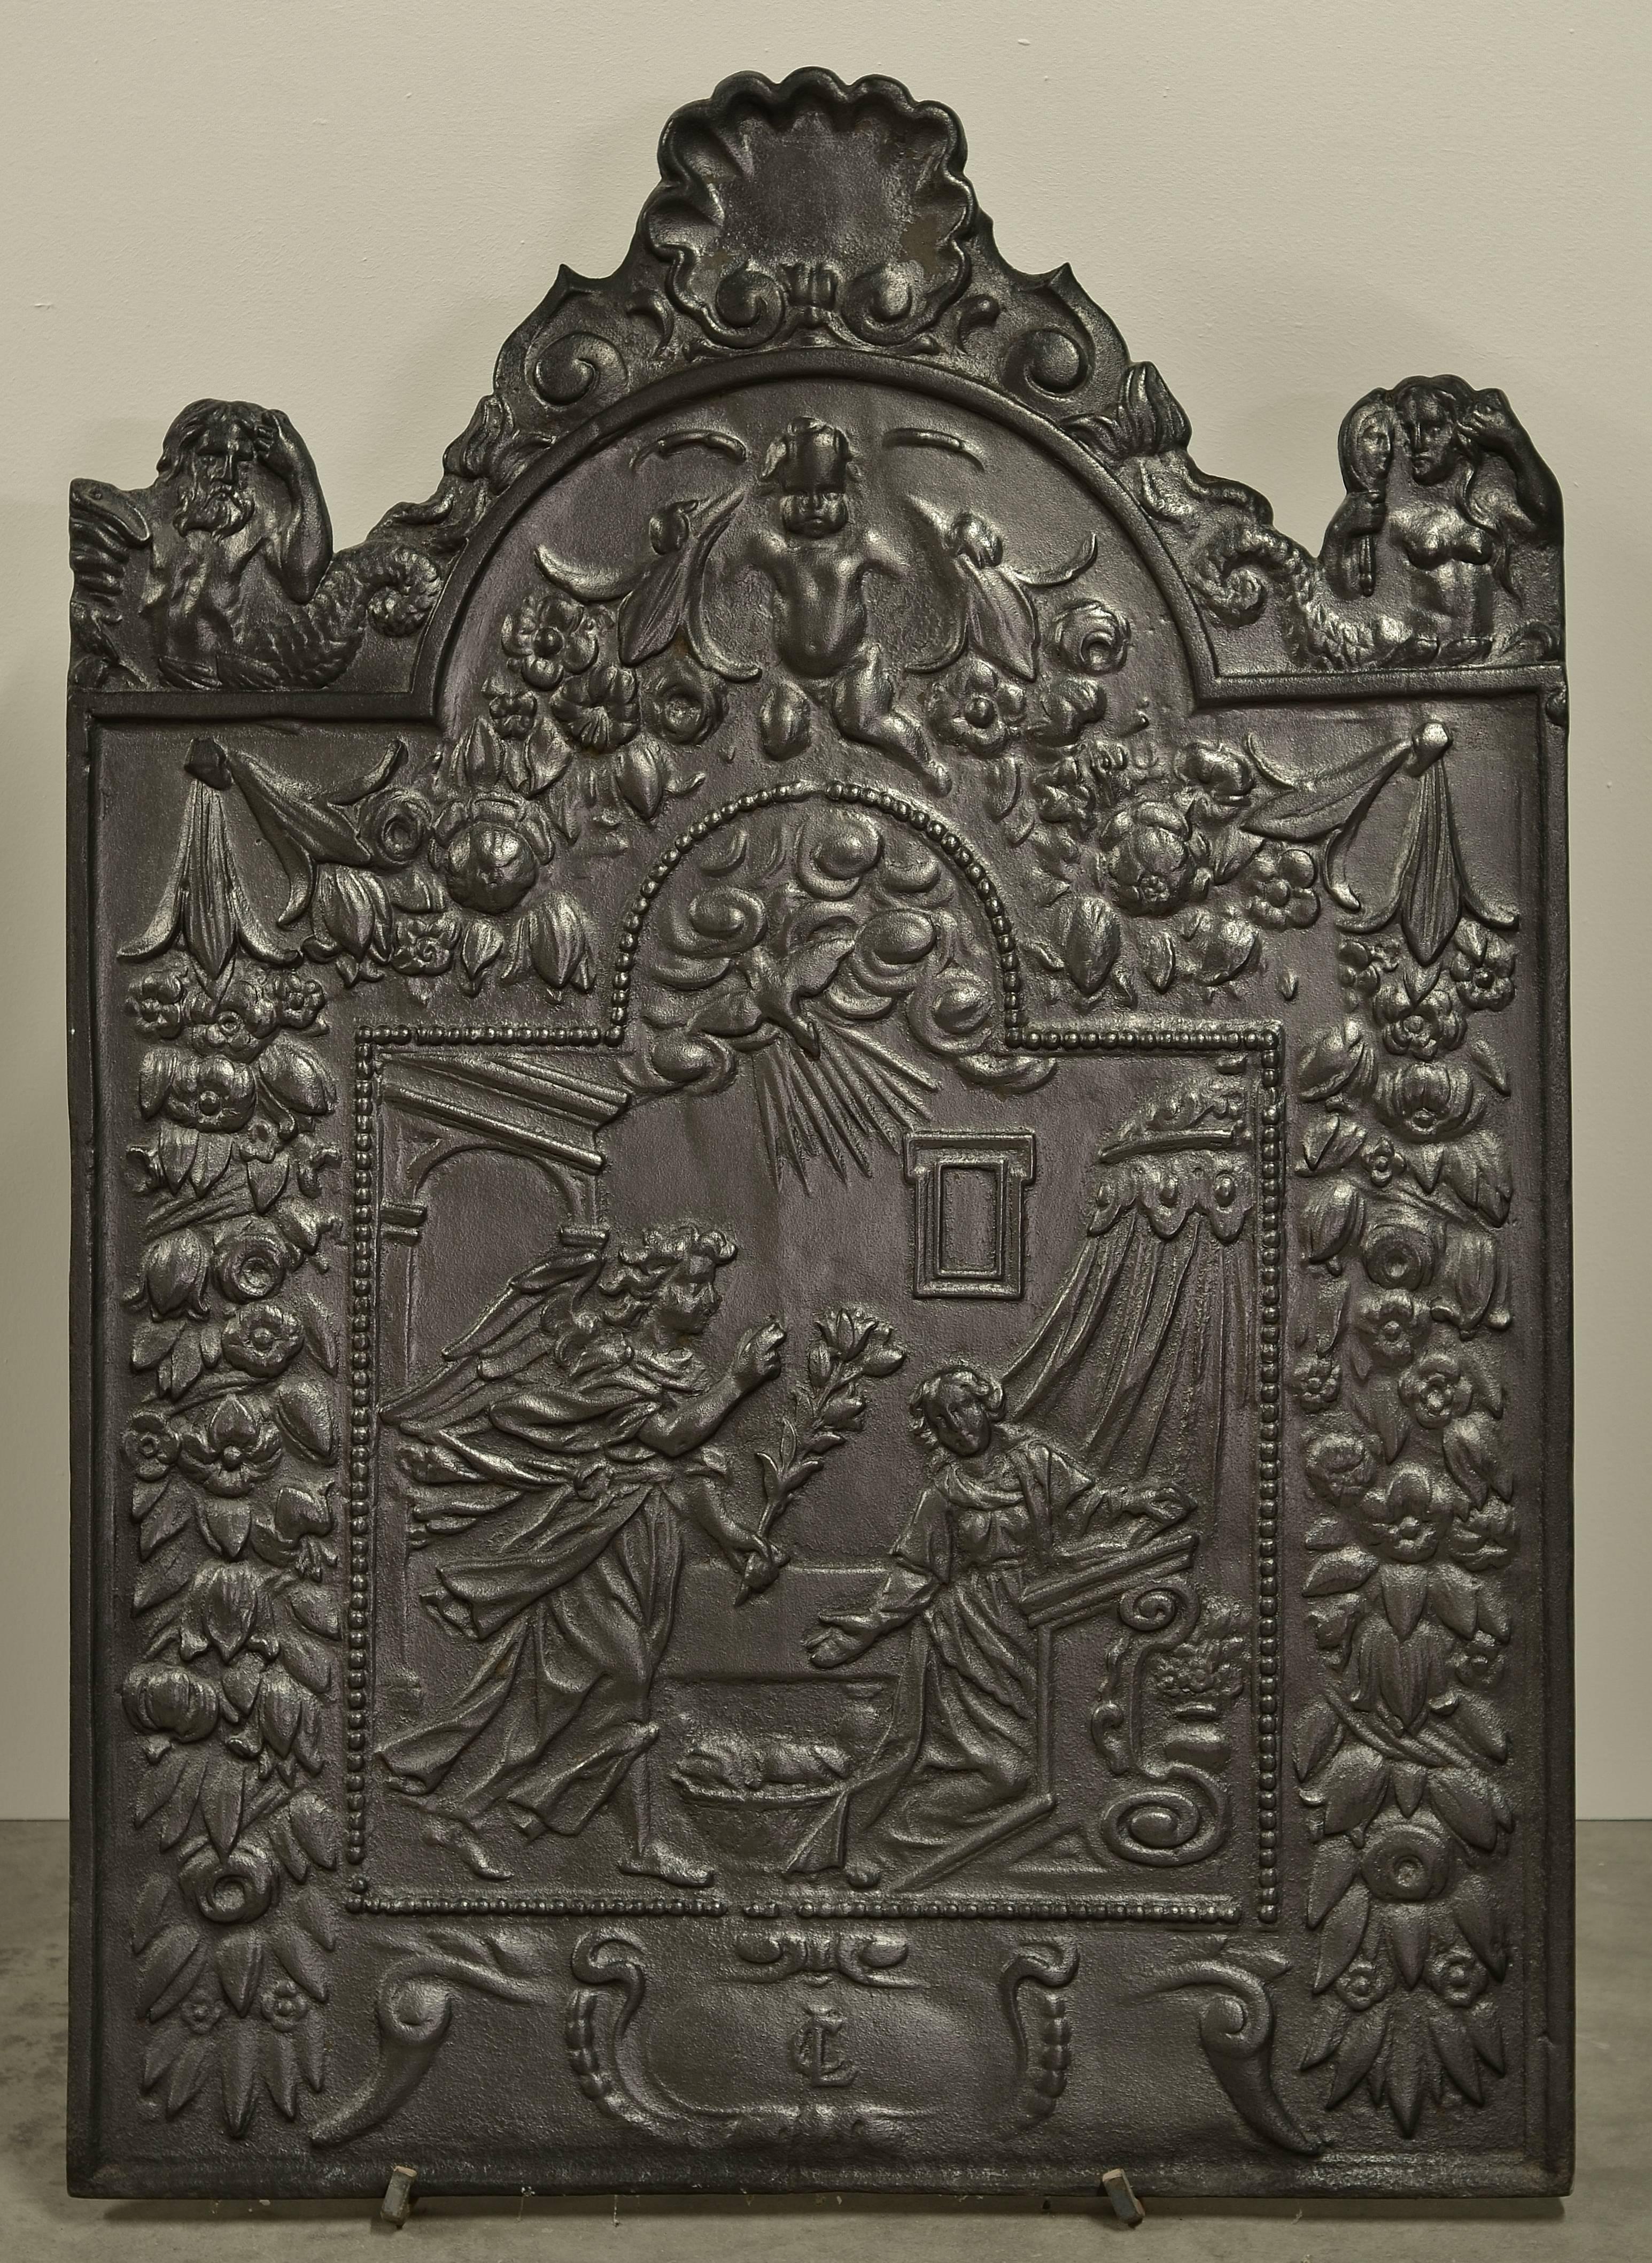 This huge one of a kind antique cast iron fireback displays the annunciation - the Christian celebration of the announcement by the angel Gabriel to the Virgin Mary that she would conceive and become the mother of Jesus, the Son of God, marking his